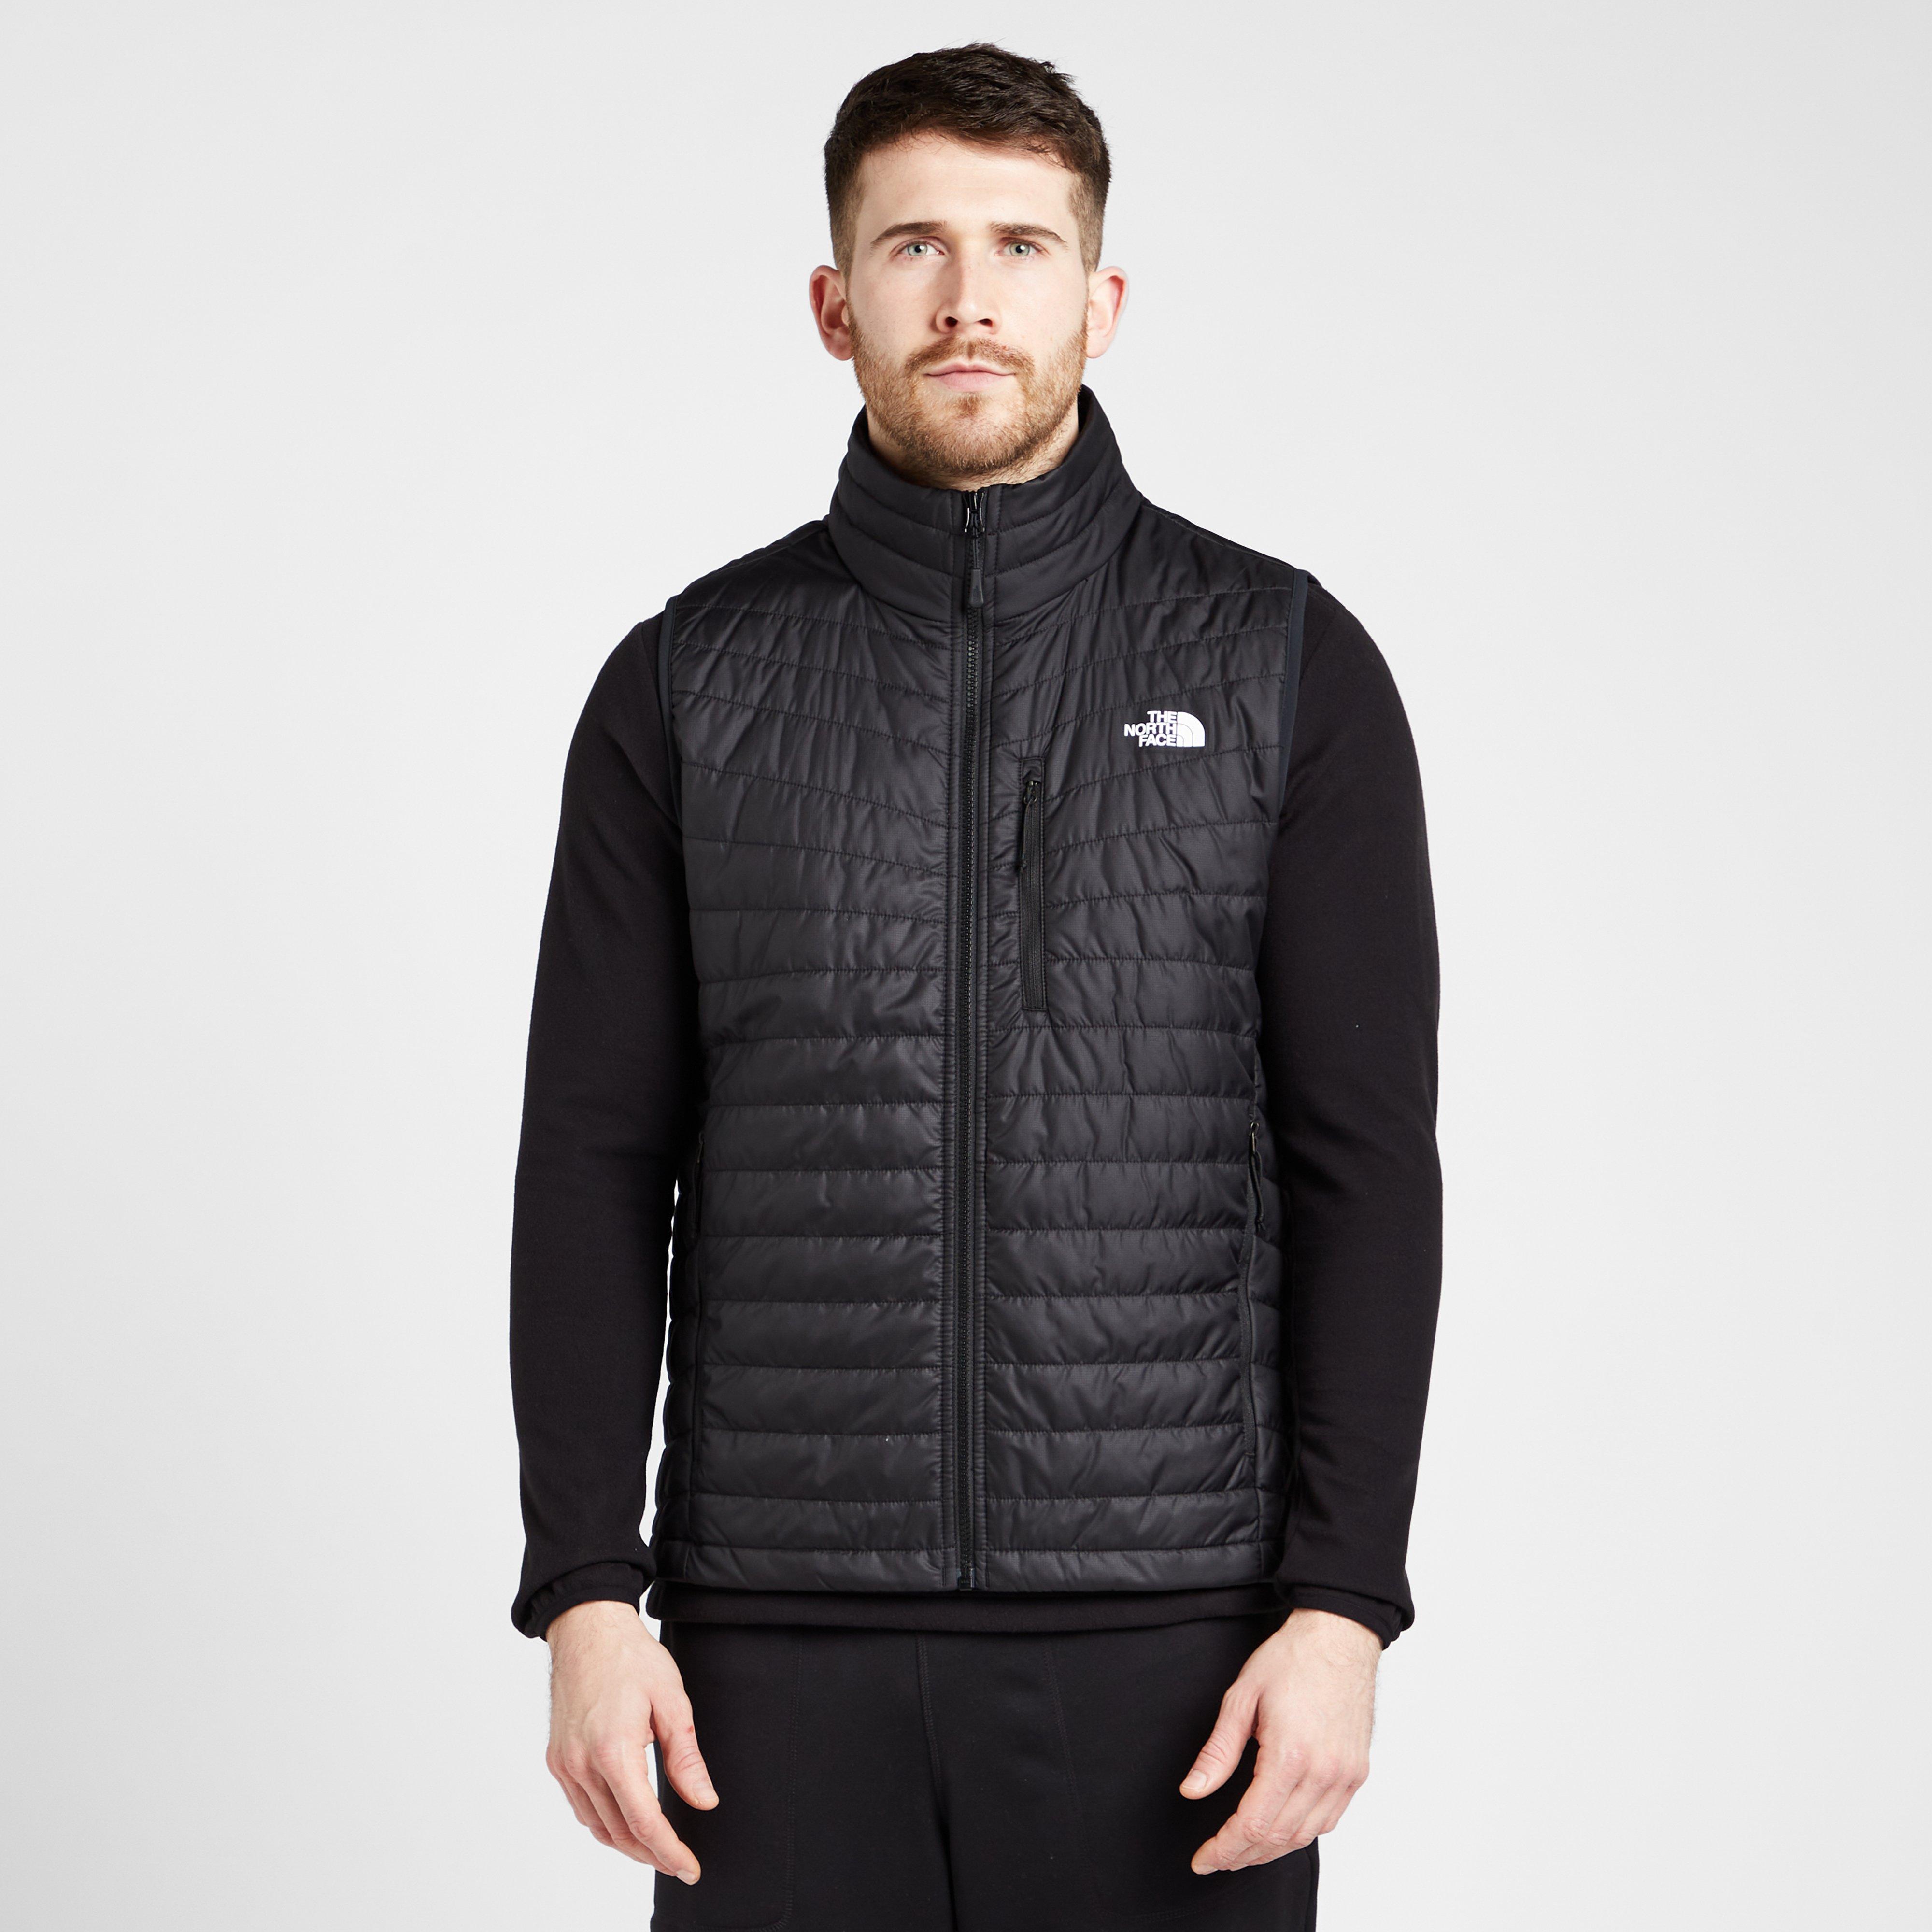 Best Price The North Face Men's Grivola Insulated Gilet - Black, Black ...